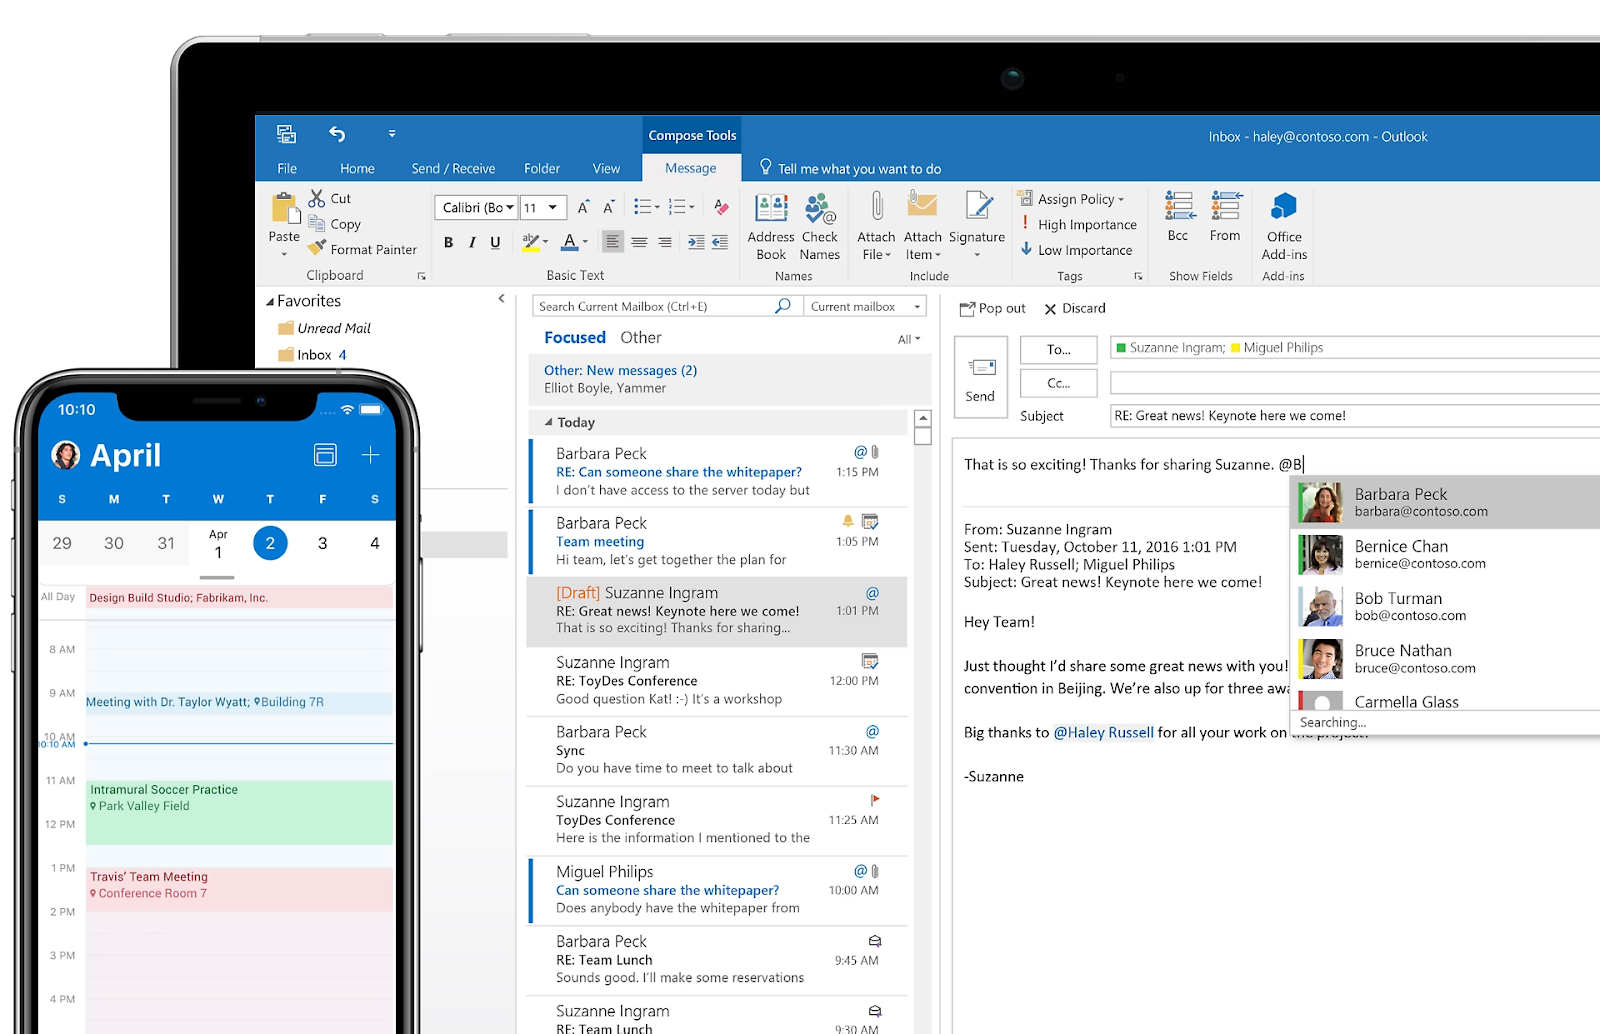 Microsoft Outlook email management tool